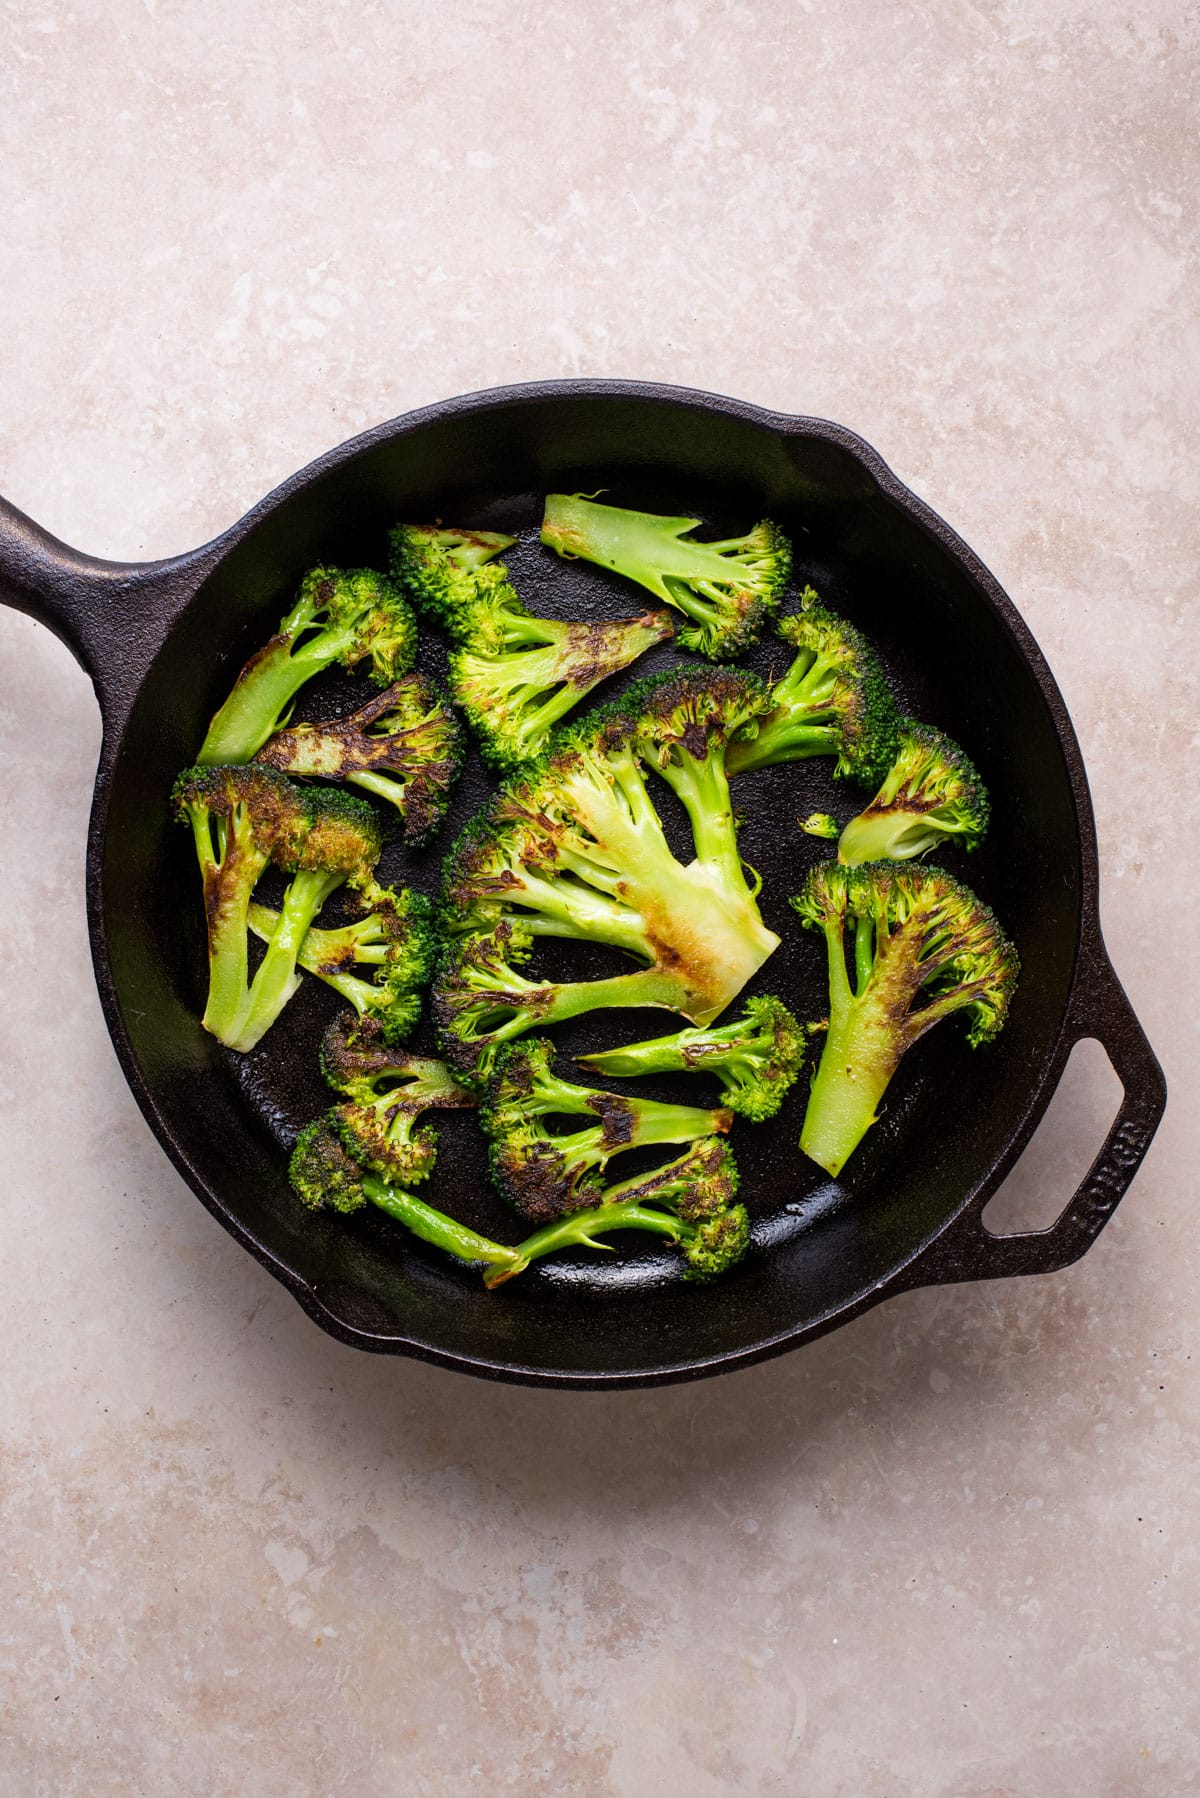 Charred broccoli pieces in a cast iron skillet.